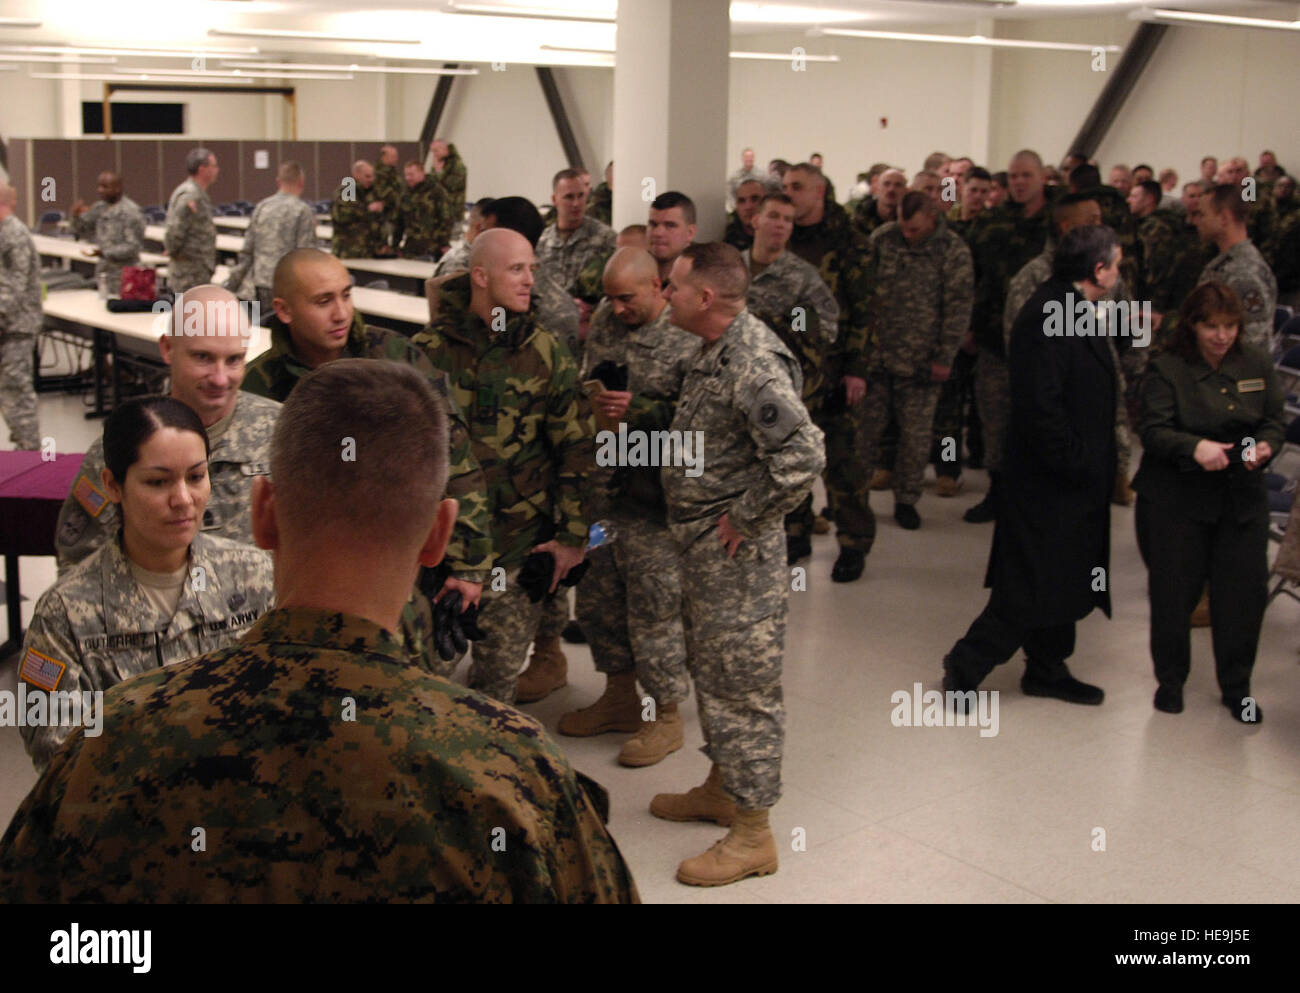 General Peter Pace, chairman of the Joint Chiefs of Staff, shakes the hands of individuals assigned to the 1/25 SBCT formerly the 172nd, at the conclusion of a Town Hall meeting at Fort Wainwright, AK., Feb. 22, 2007. Defense Dept  Staff Sgt. D. Myles Cullen (released) Stock Photo